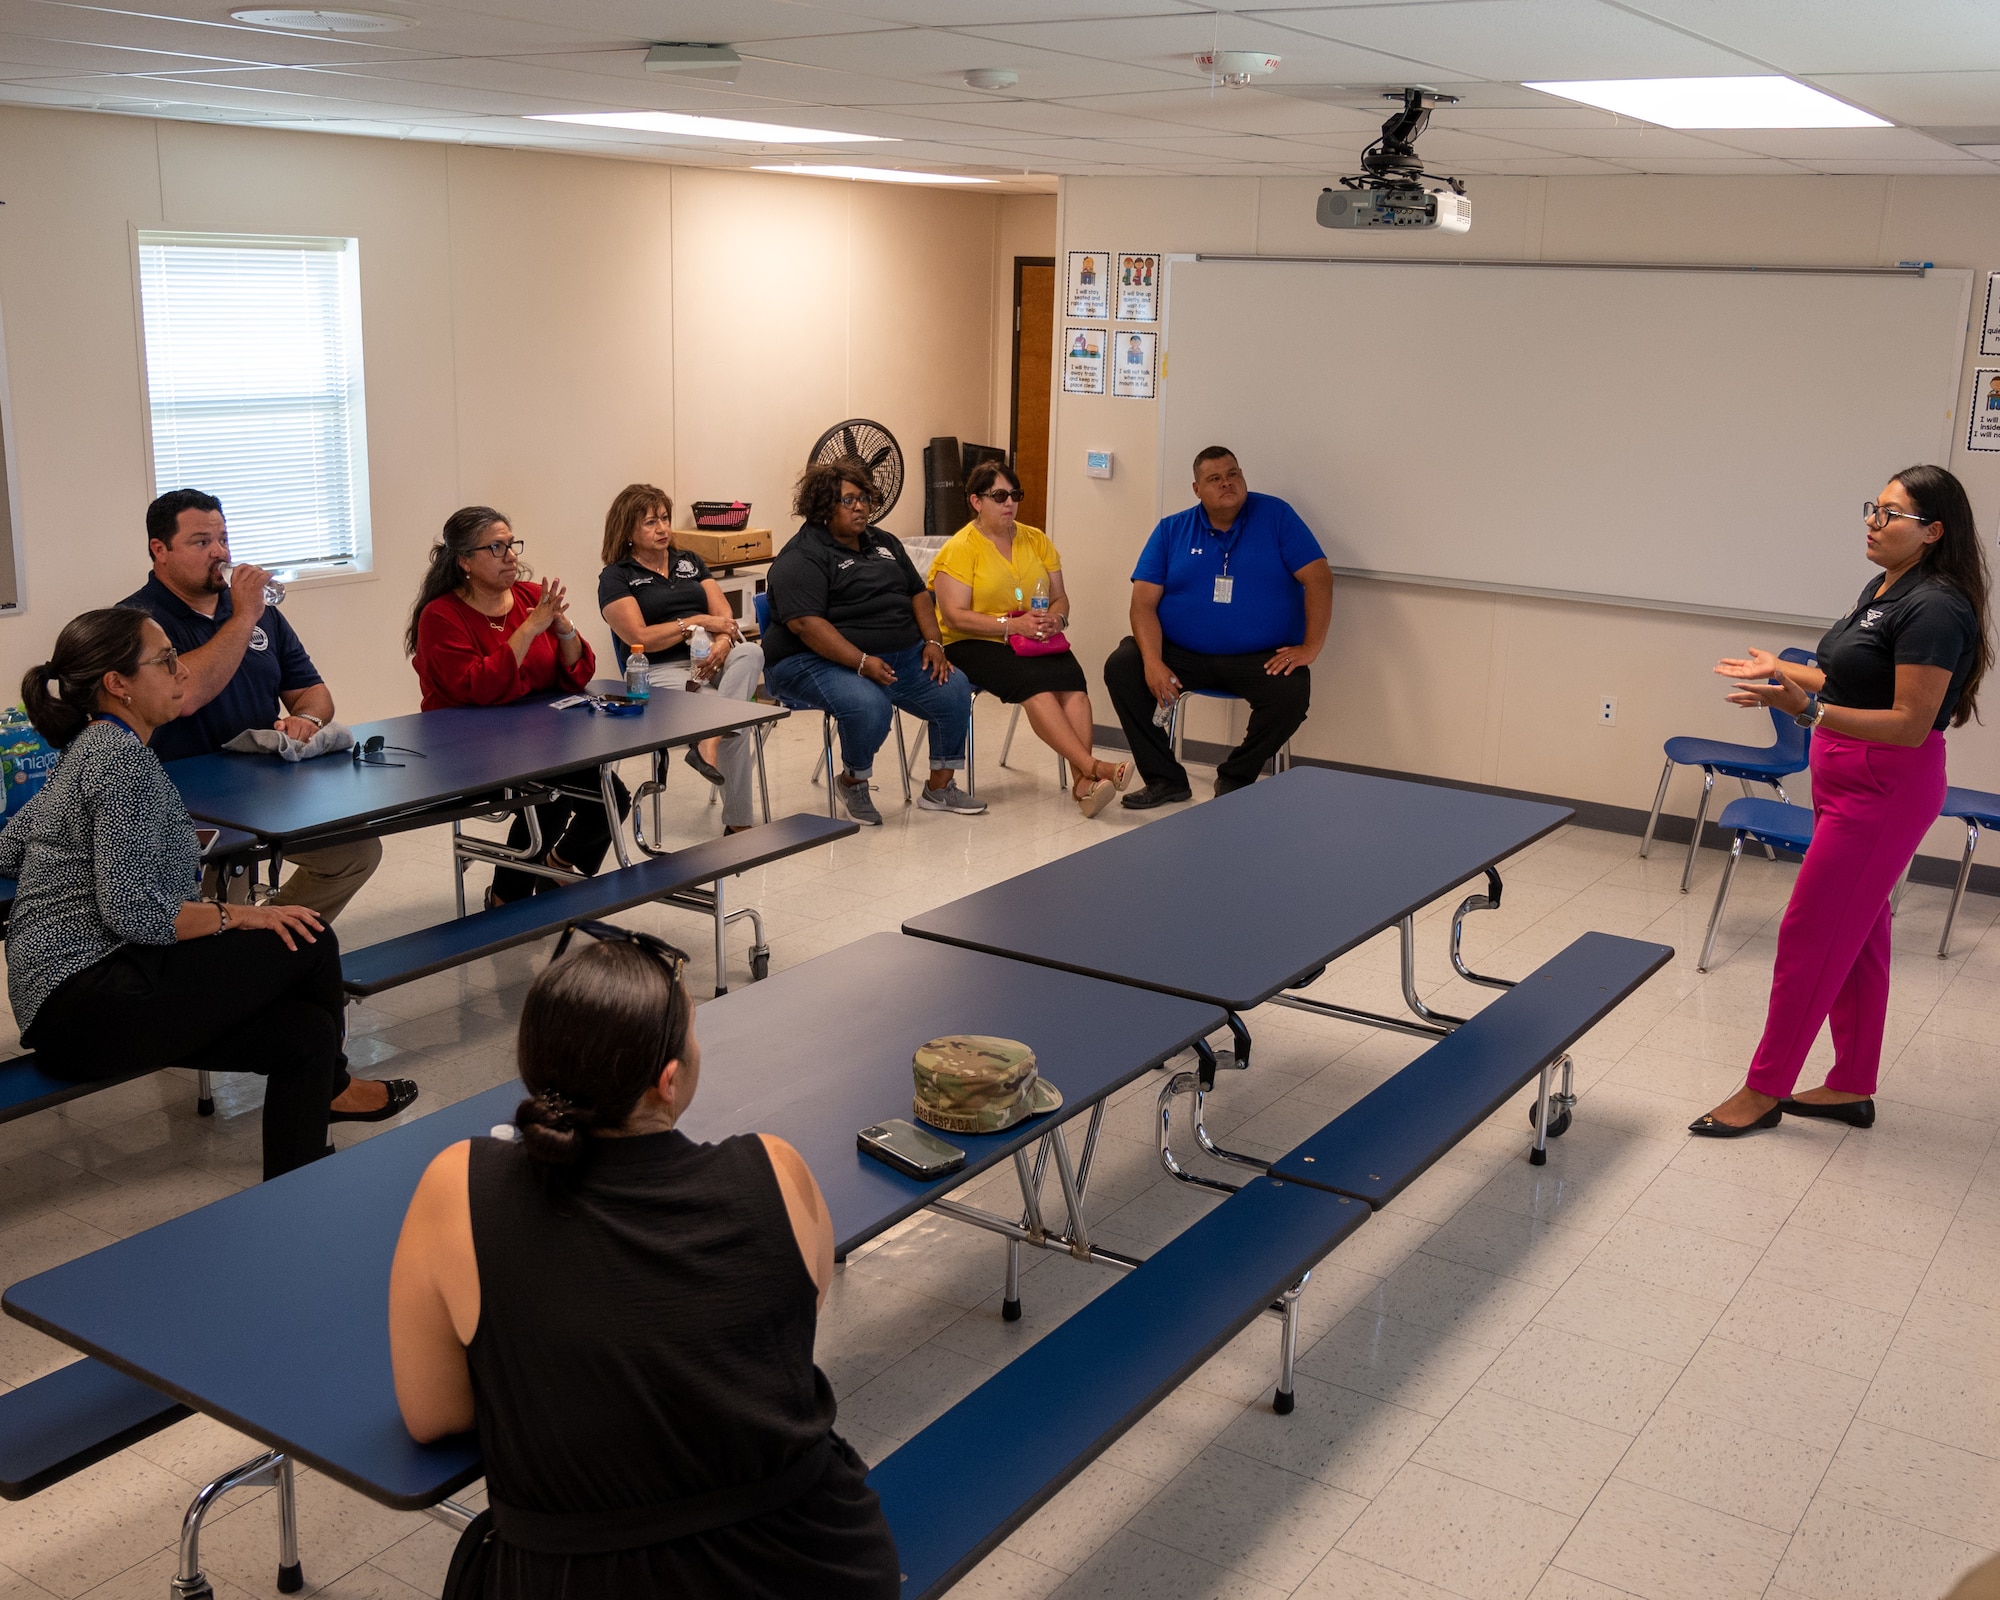 Education Leaders from the San Felipe Del Rio Consolidated Independent School District (SFDR-CISD) listen as Janette Gomez, 47th Force Support Squadron school liaison program manager, speaks about upcoming plans for the Robert Bobby Barrera Elementary School (RBB) at Laughlin Air Force Base, Texas, July 18, 2023. RBB Elementary School provides education for the children of military and civilian families at Laughlin AFB. (U.S. Air Force photo by Senior Airman Nicholas Larsen)